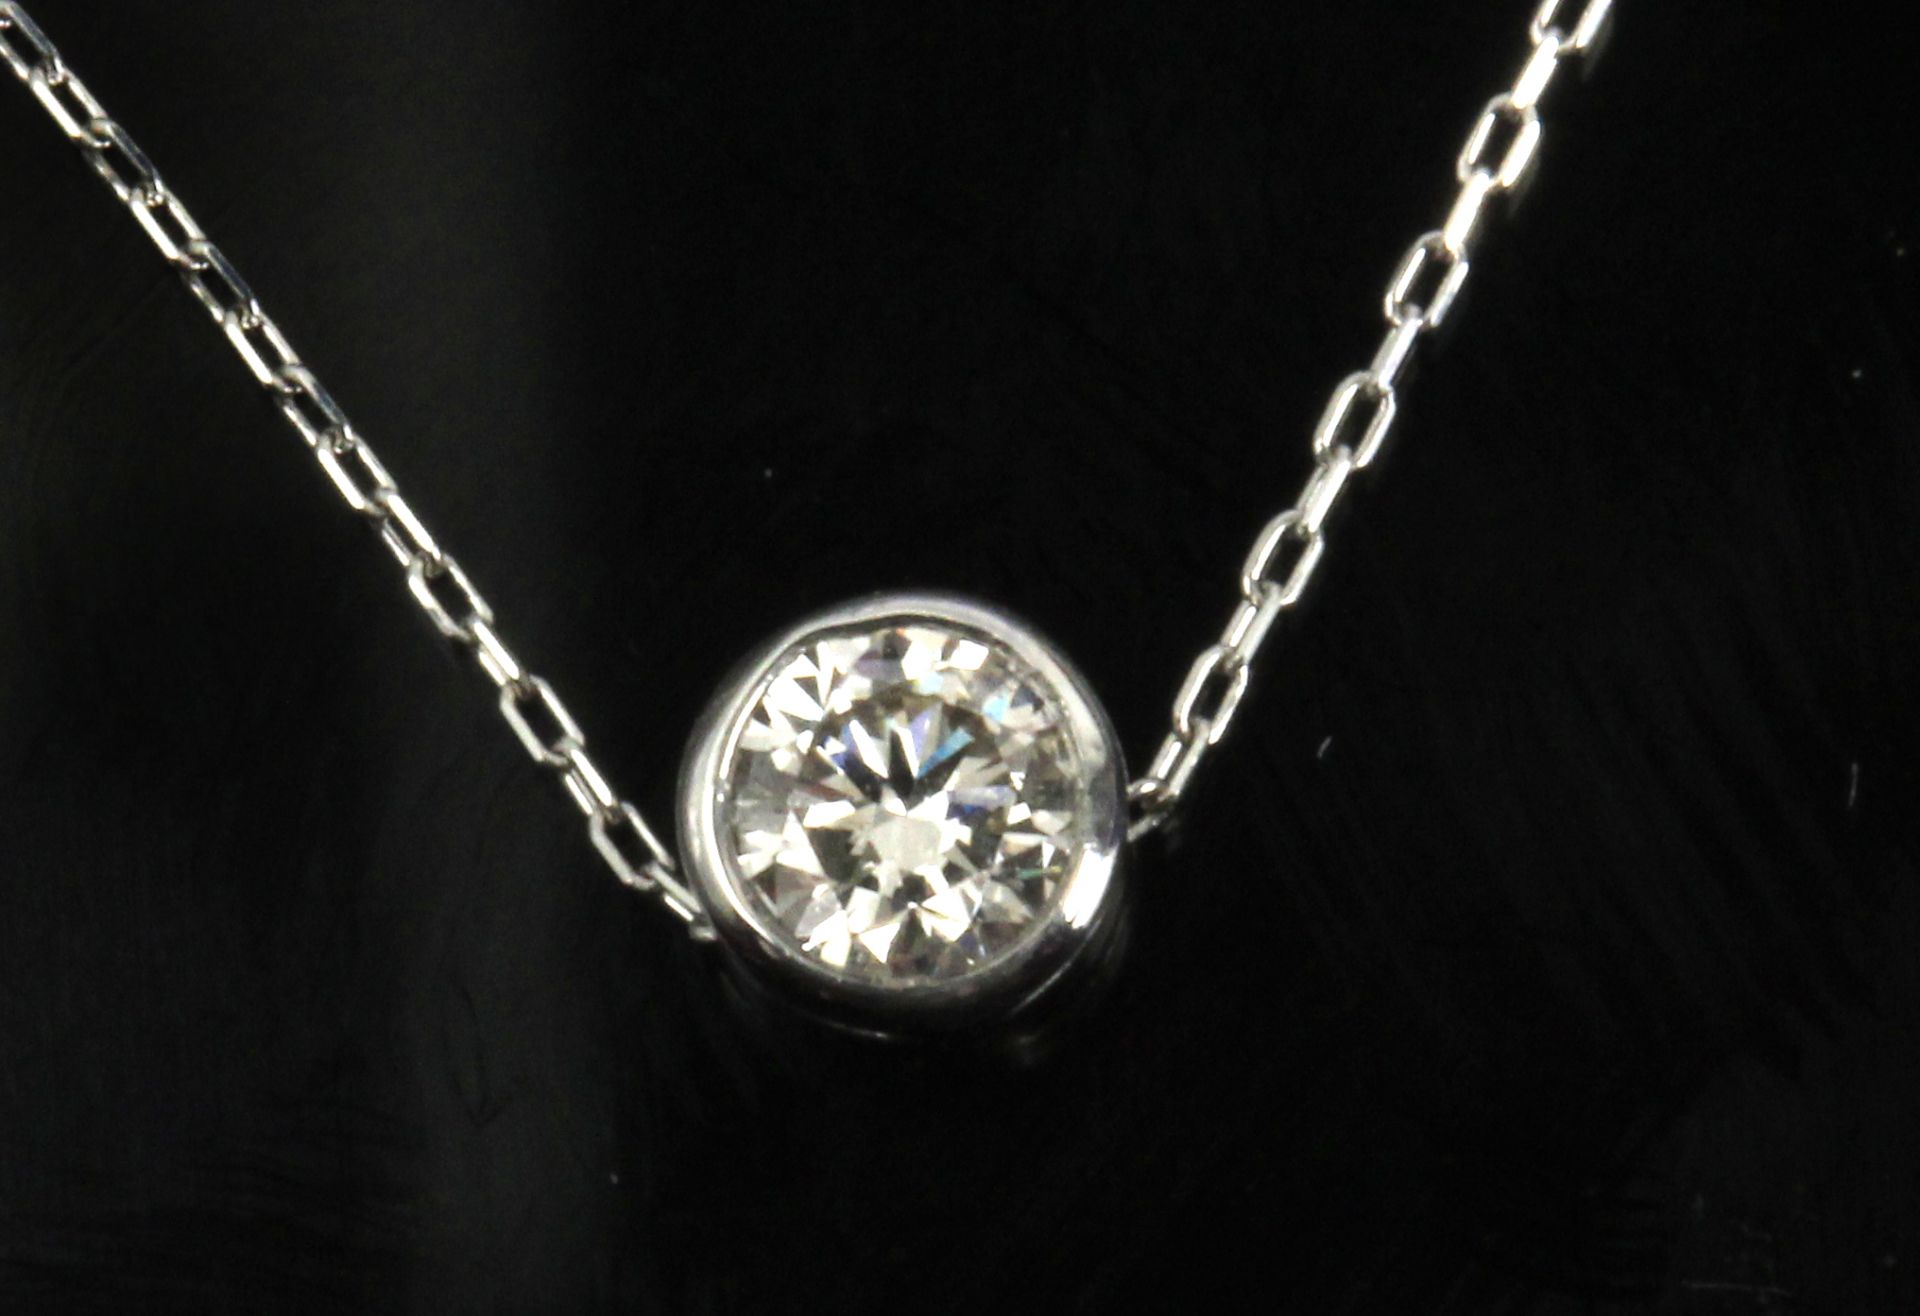 A 0,20 ct. round brilliant cut diamond bezel solitaire pendant with a plantinum setting and chain